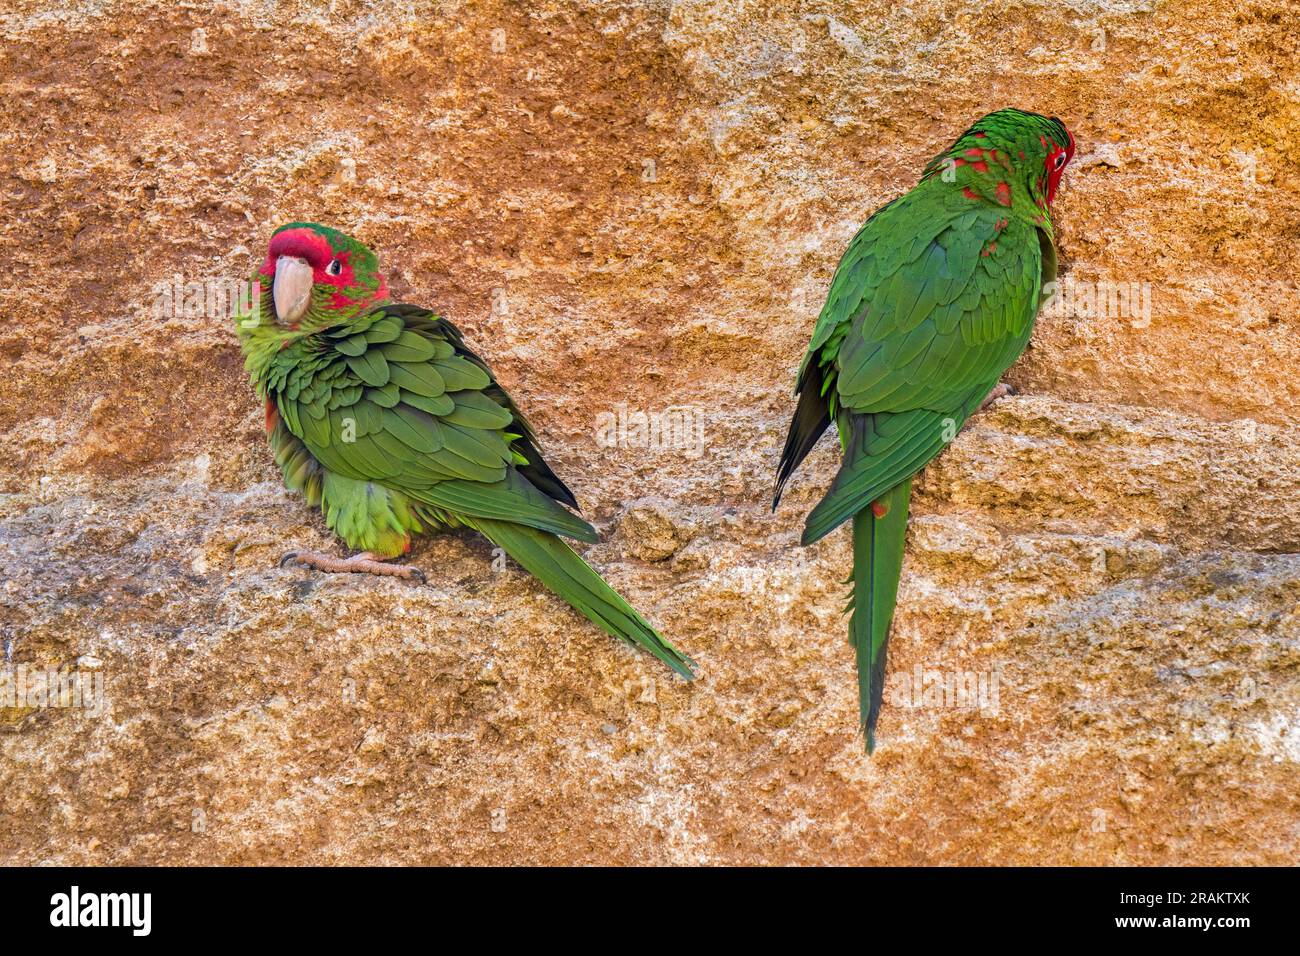 Mitred parakeet / mitred conure (Psittacara mitratus) pair on rock ledge in cliff face, native to South American Andes from Peru, Bolivia to Argentina Stock Photo